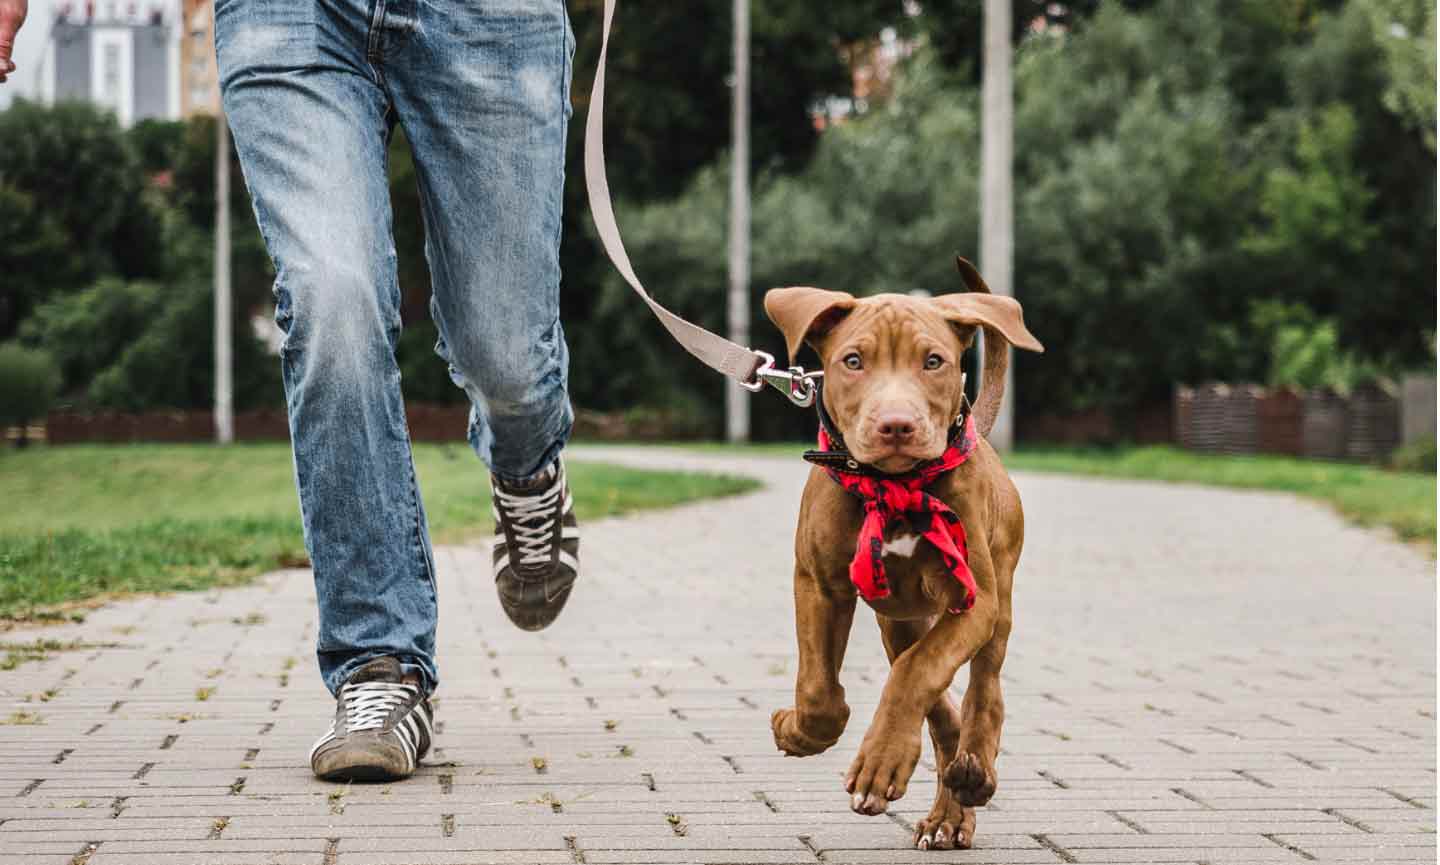 A man running with a puppy on a leash